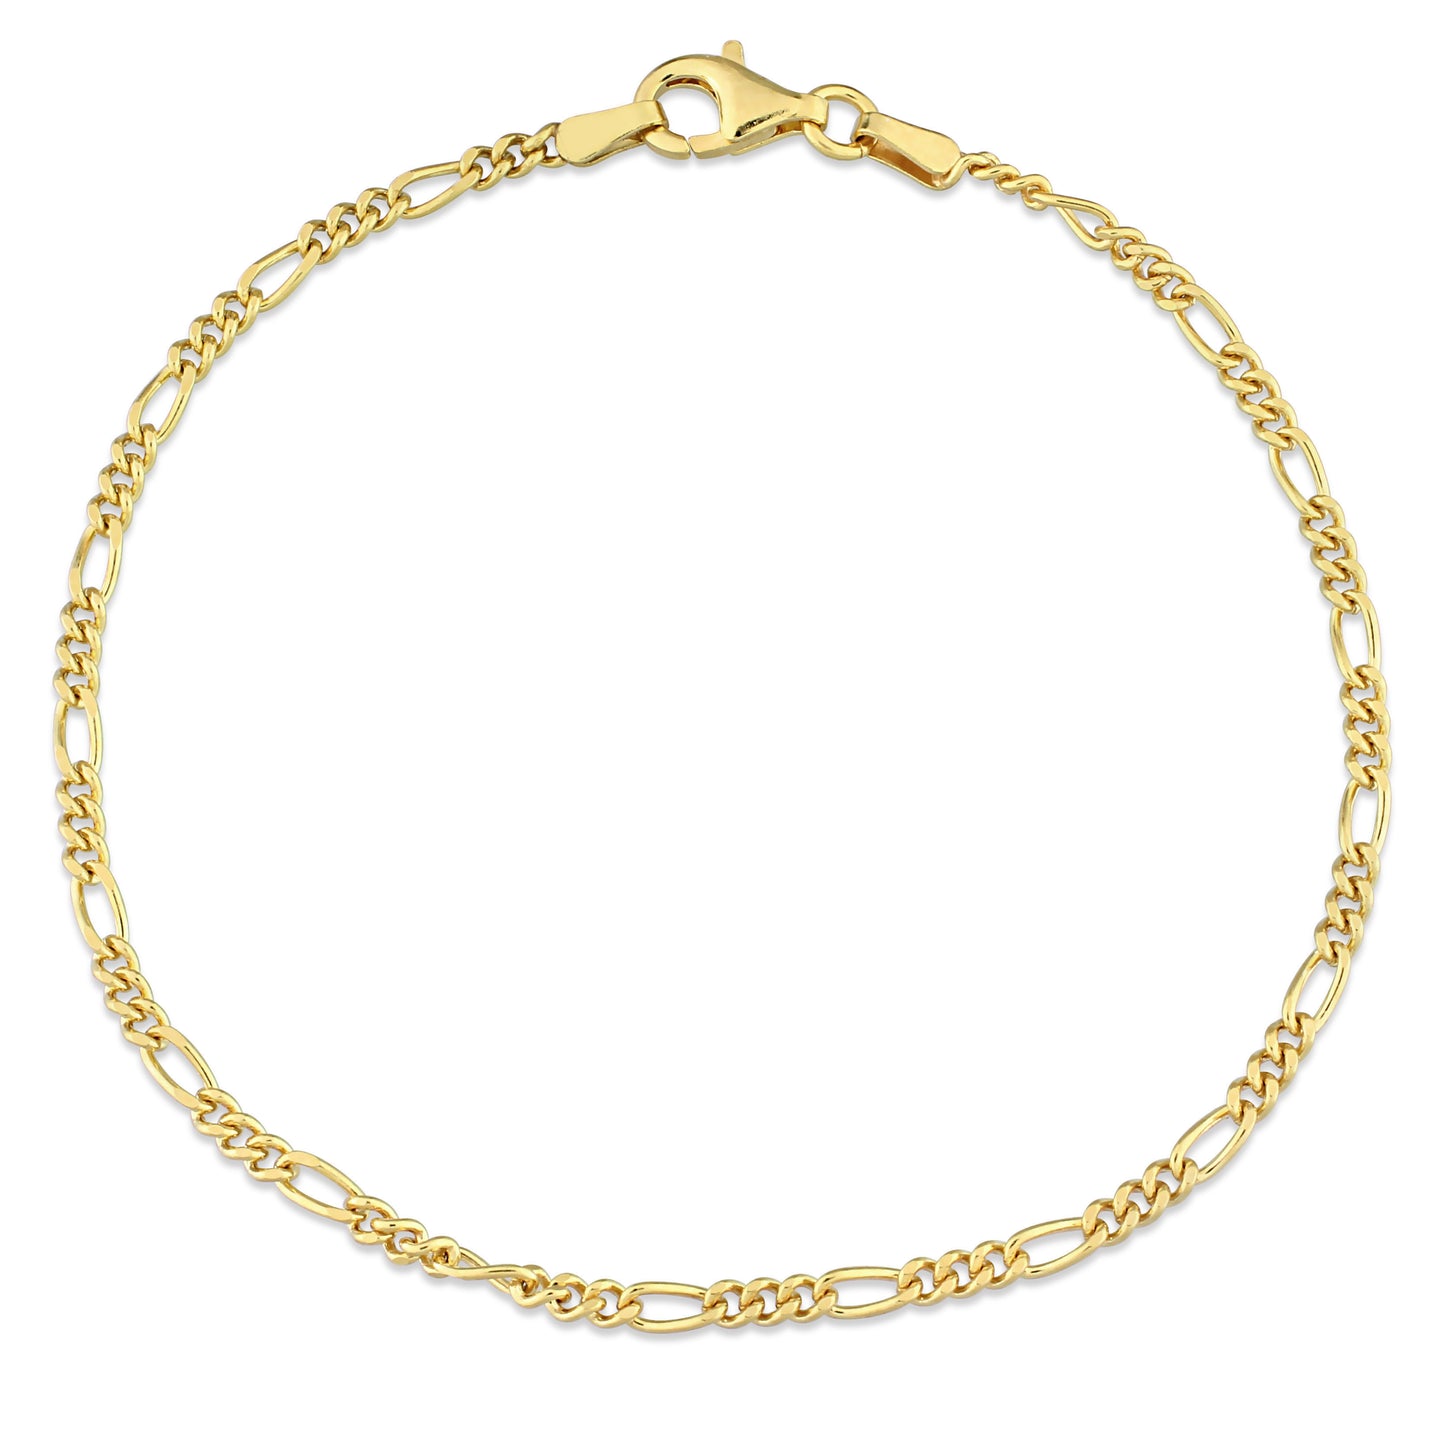 18k Yellow Gold Plated Figaro Chain Bracelet in 2.2mm